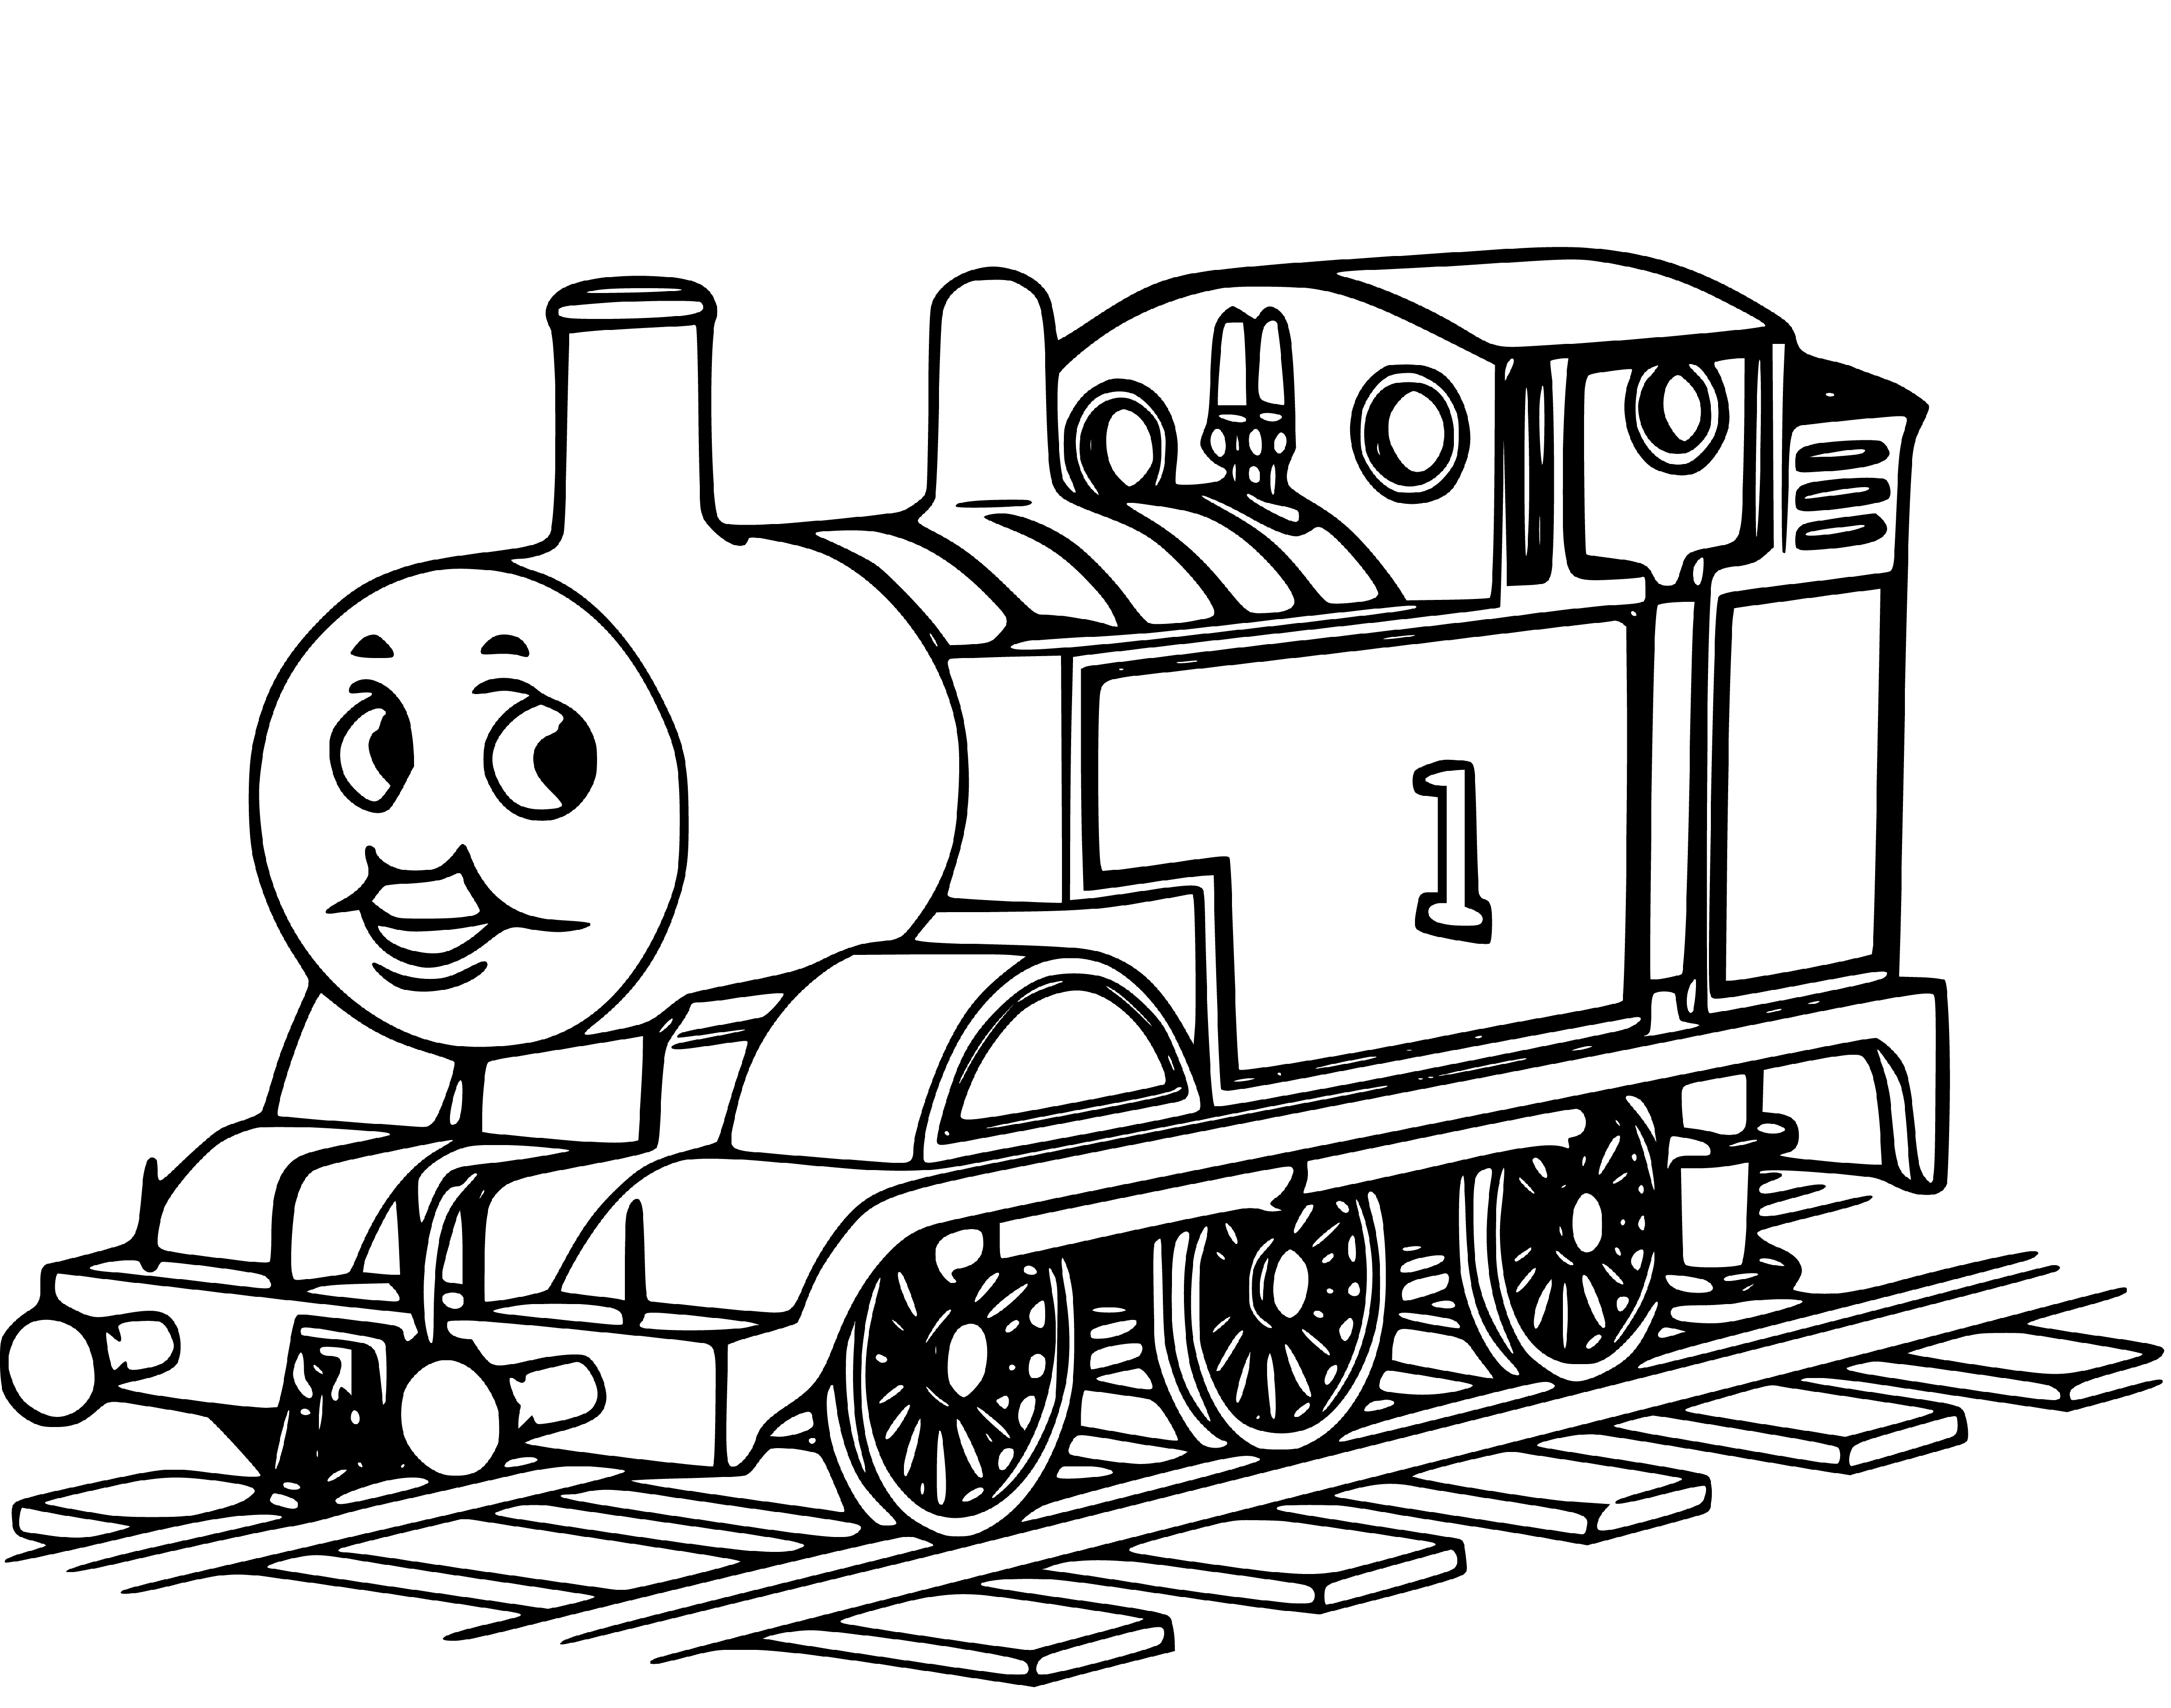 Thomas the Tank Engine (Friends) Coloring Pages for Kids Printable - SheetalColor.com